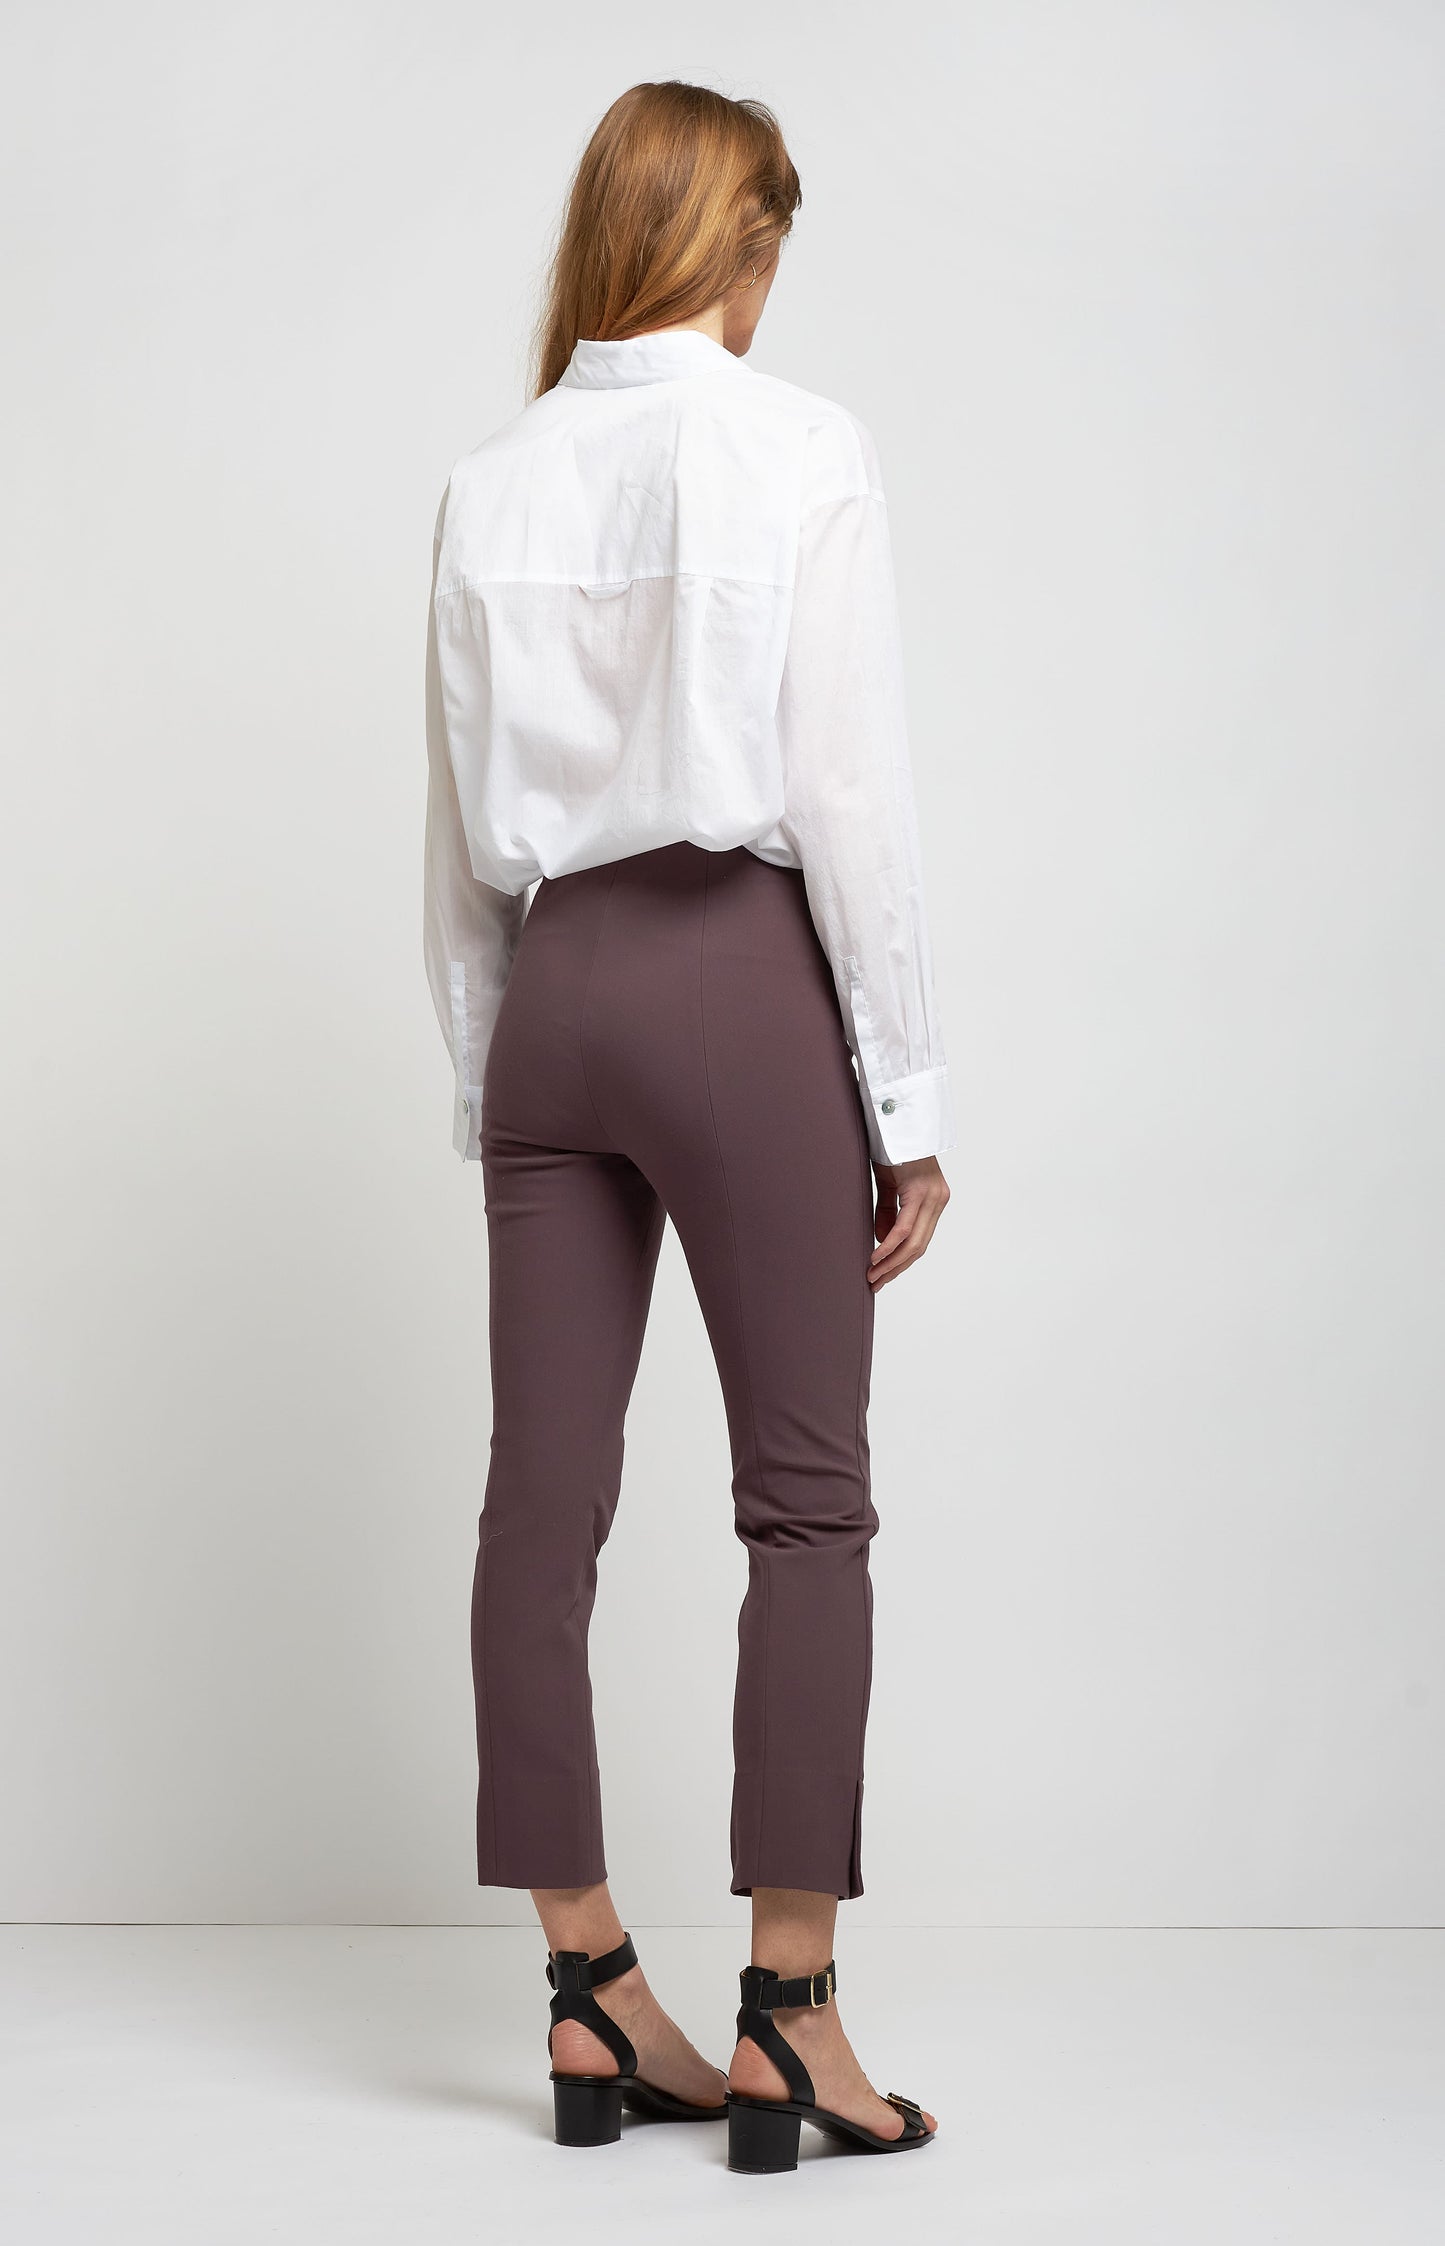 Hose Slit Hem Crop Flare in New FigVince - Anita Hass